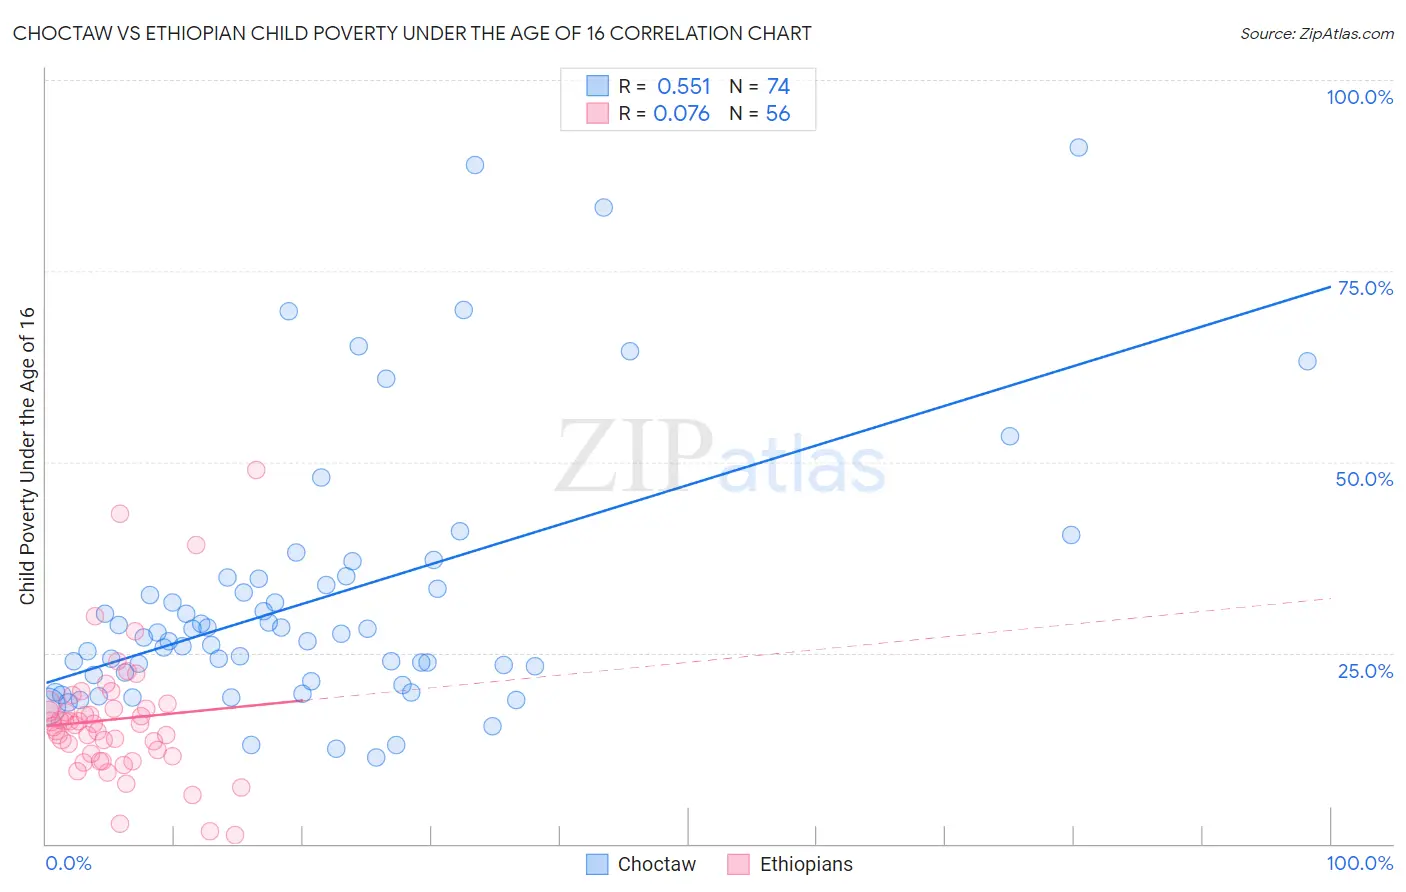 Choctaw vs Ethiopian Child Poverty Under the Age of 16